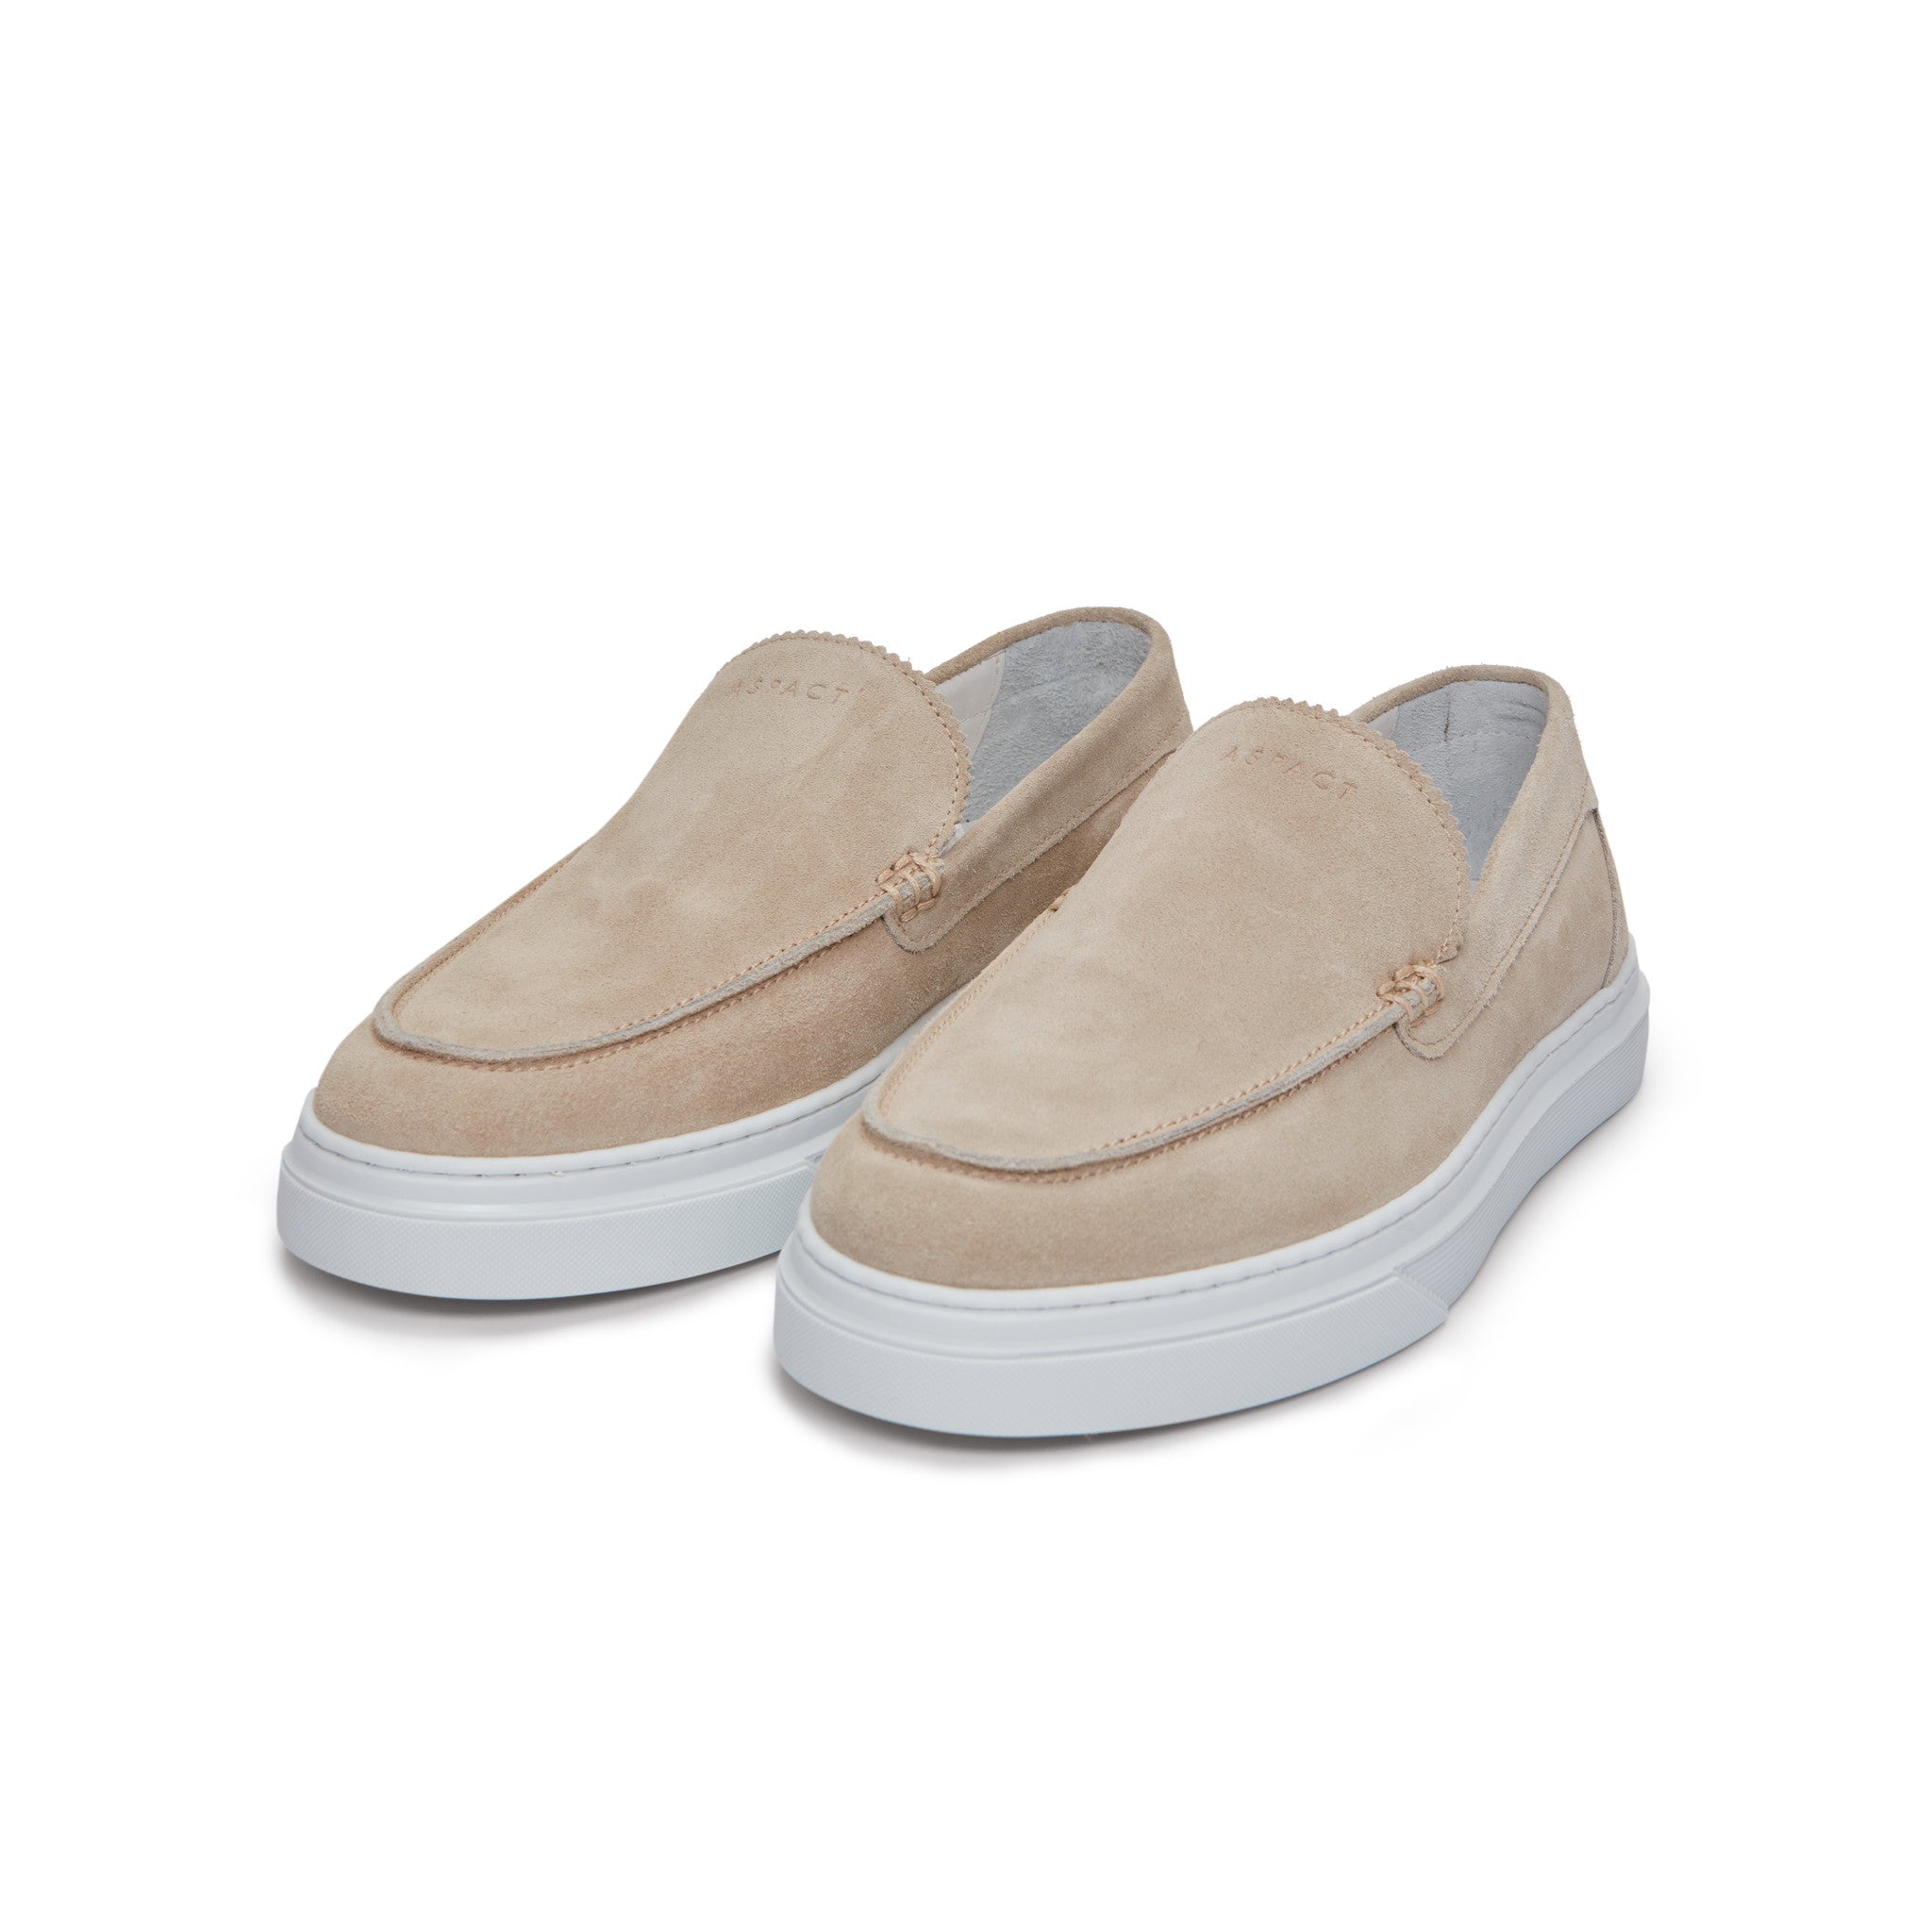 Aspact Prince Loafer Beige